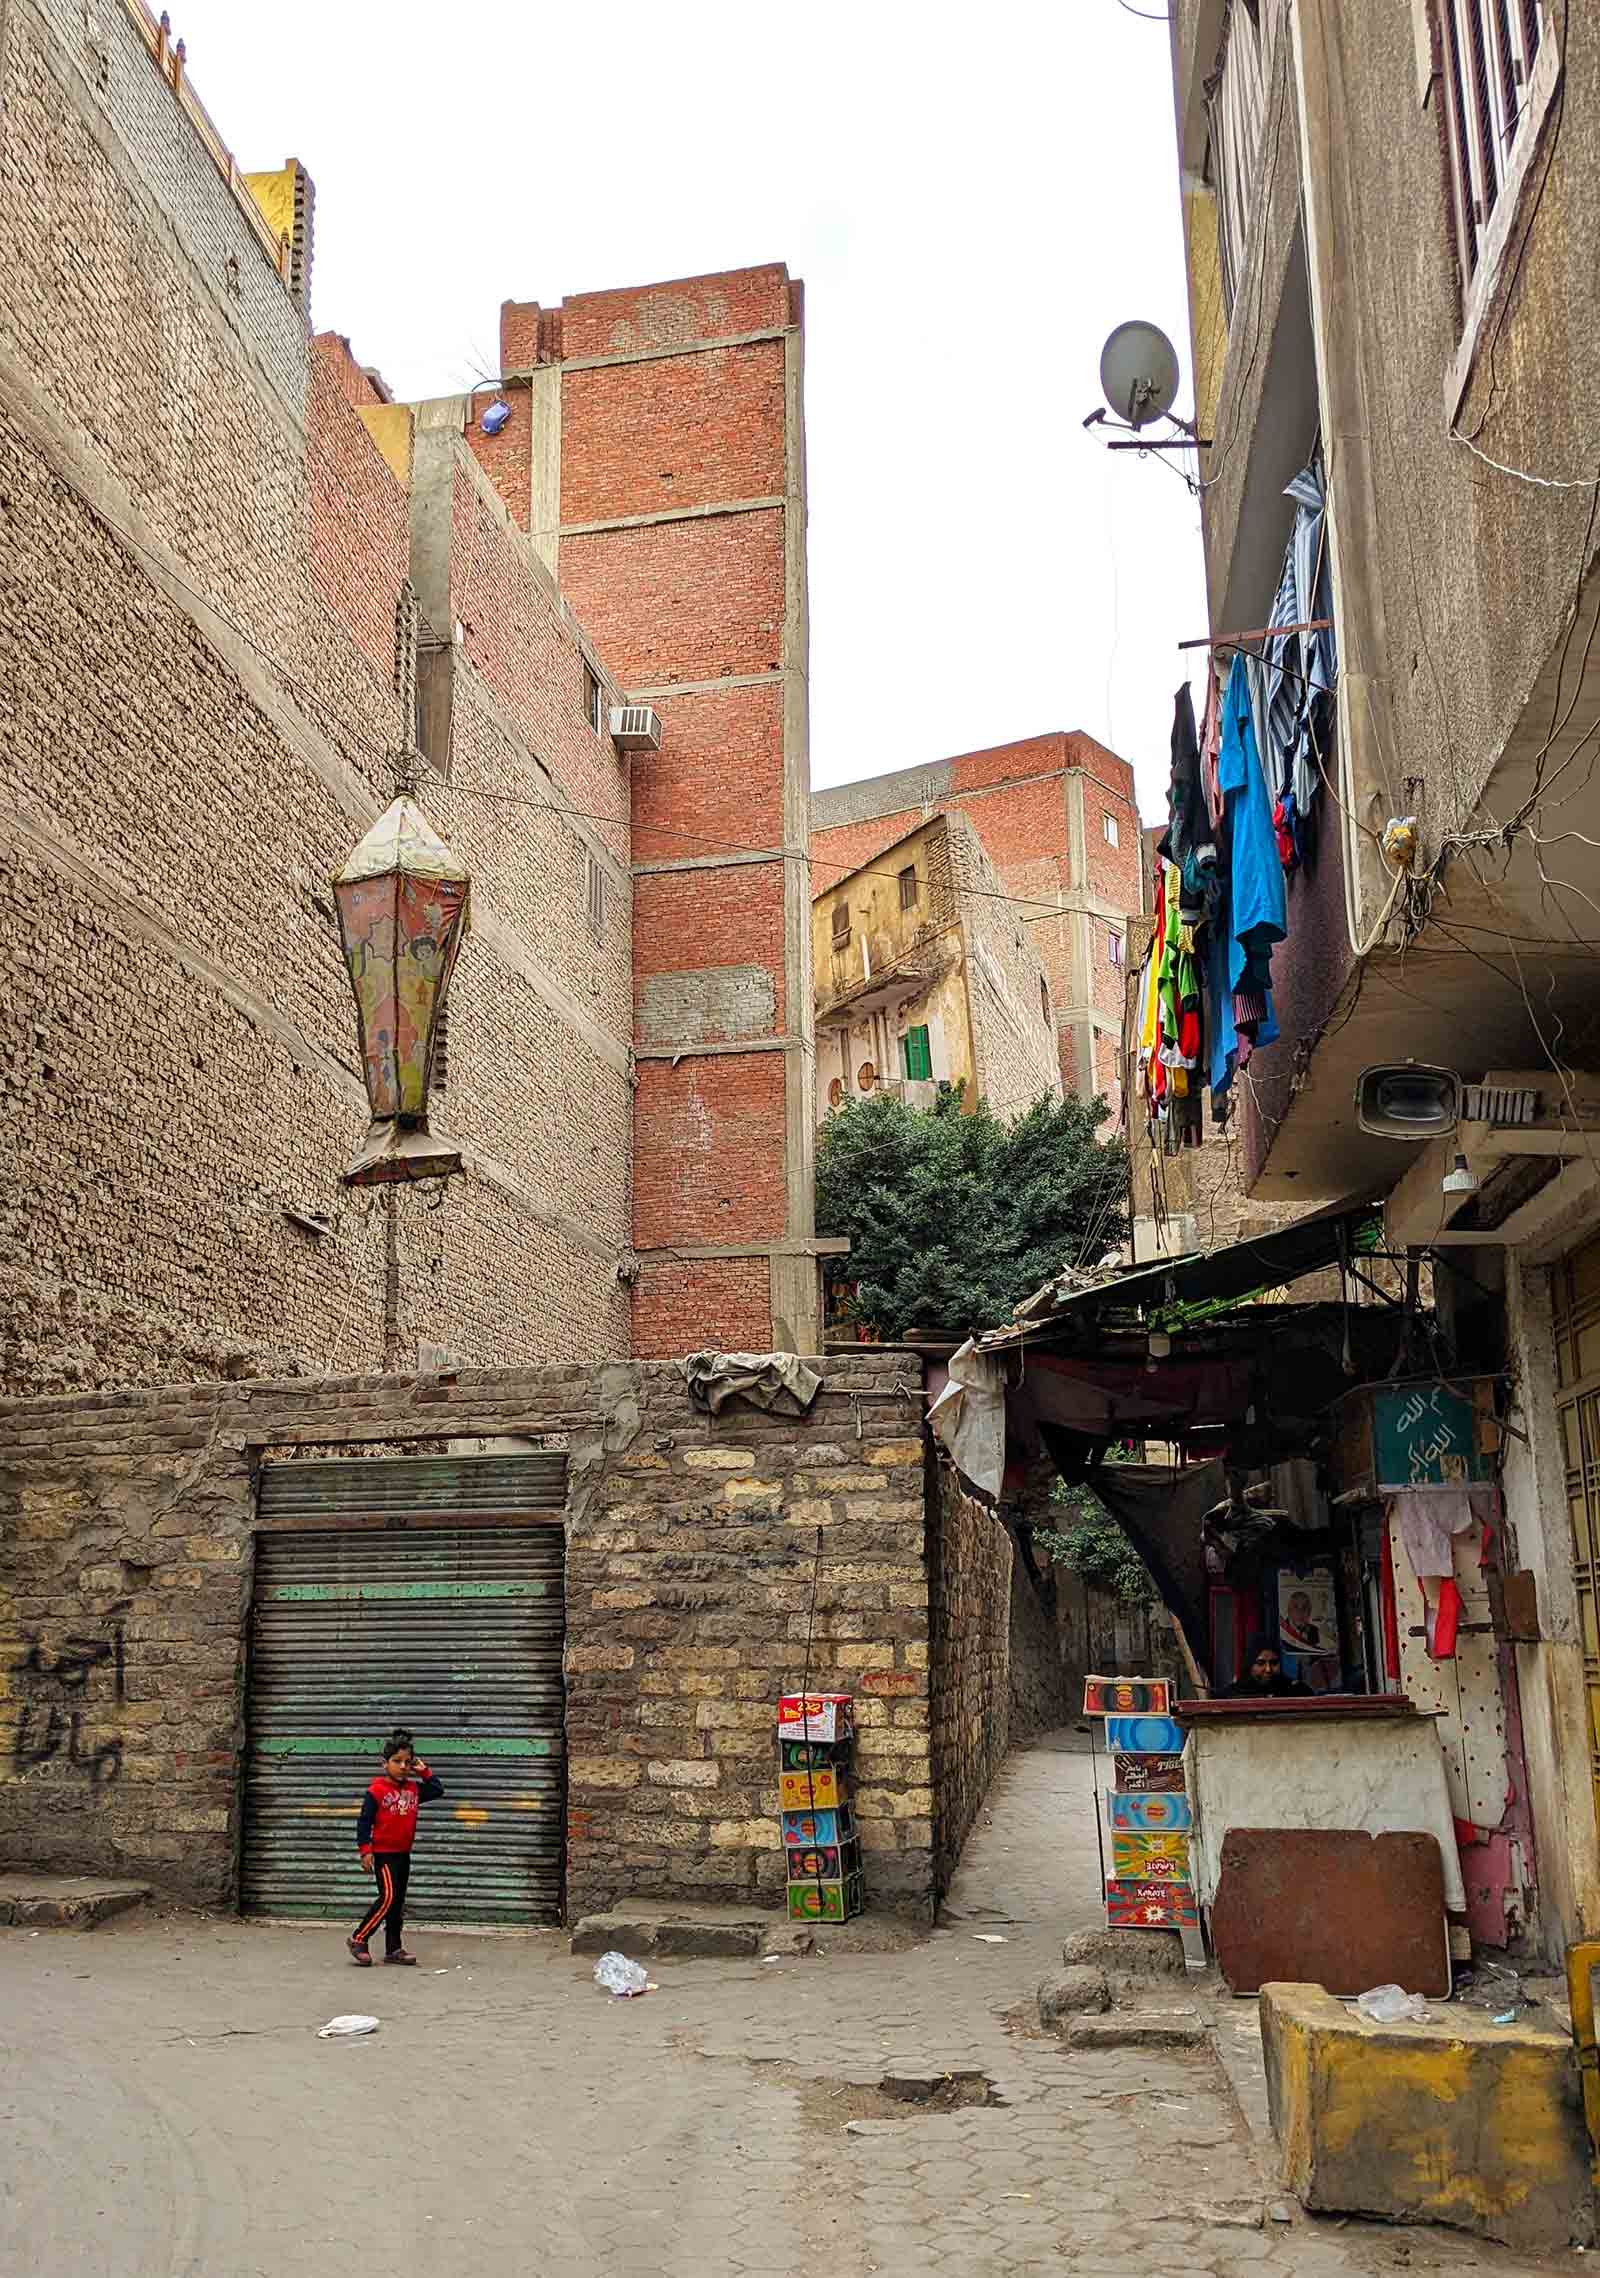 Daily life in Cairo, Egypt’s capital